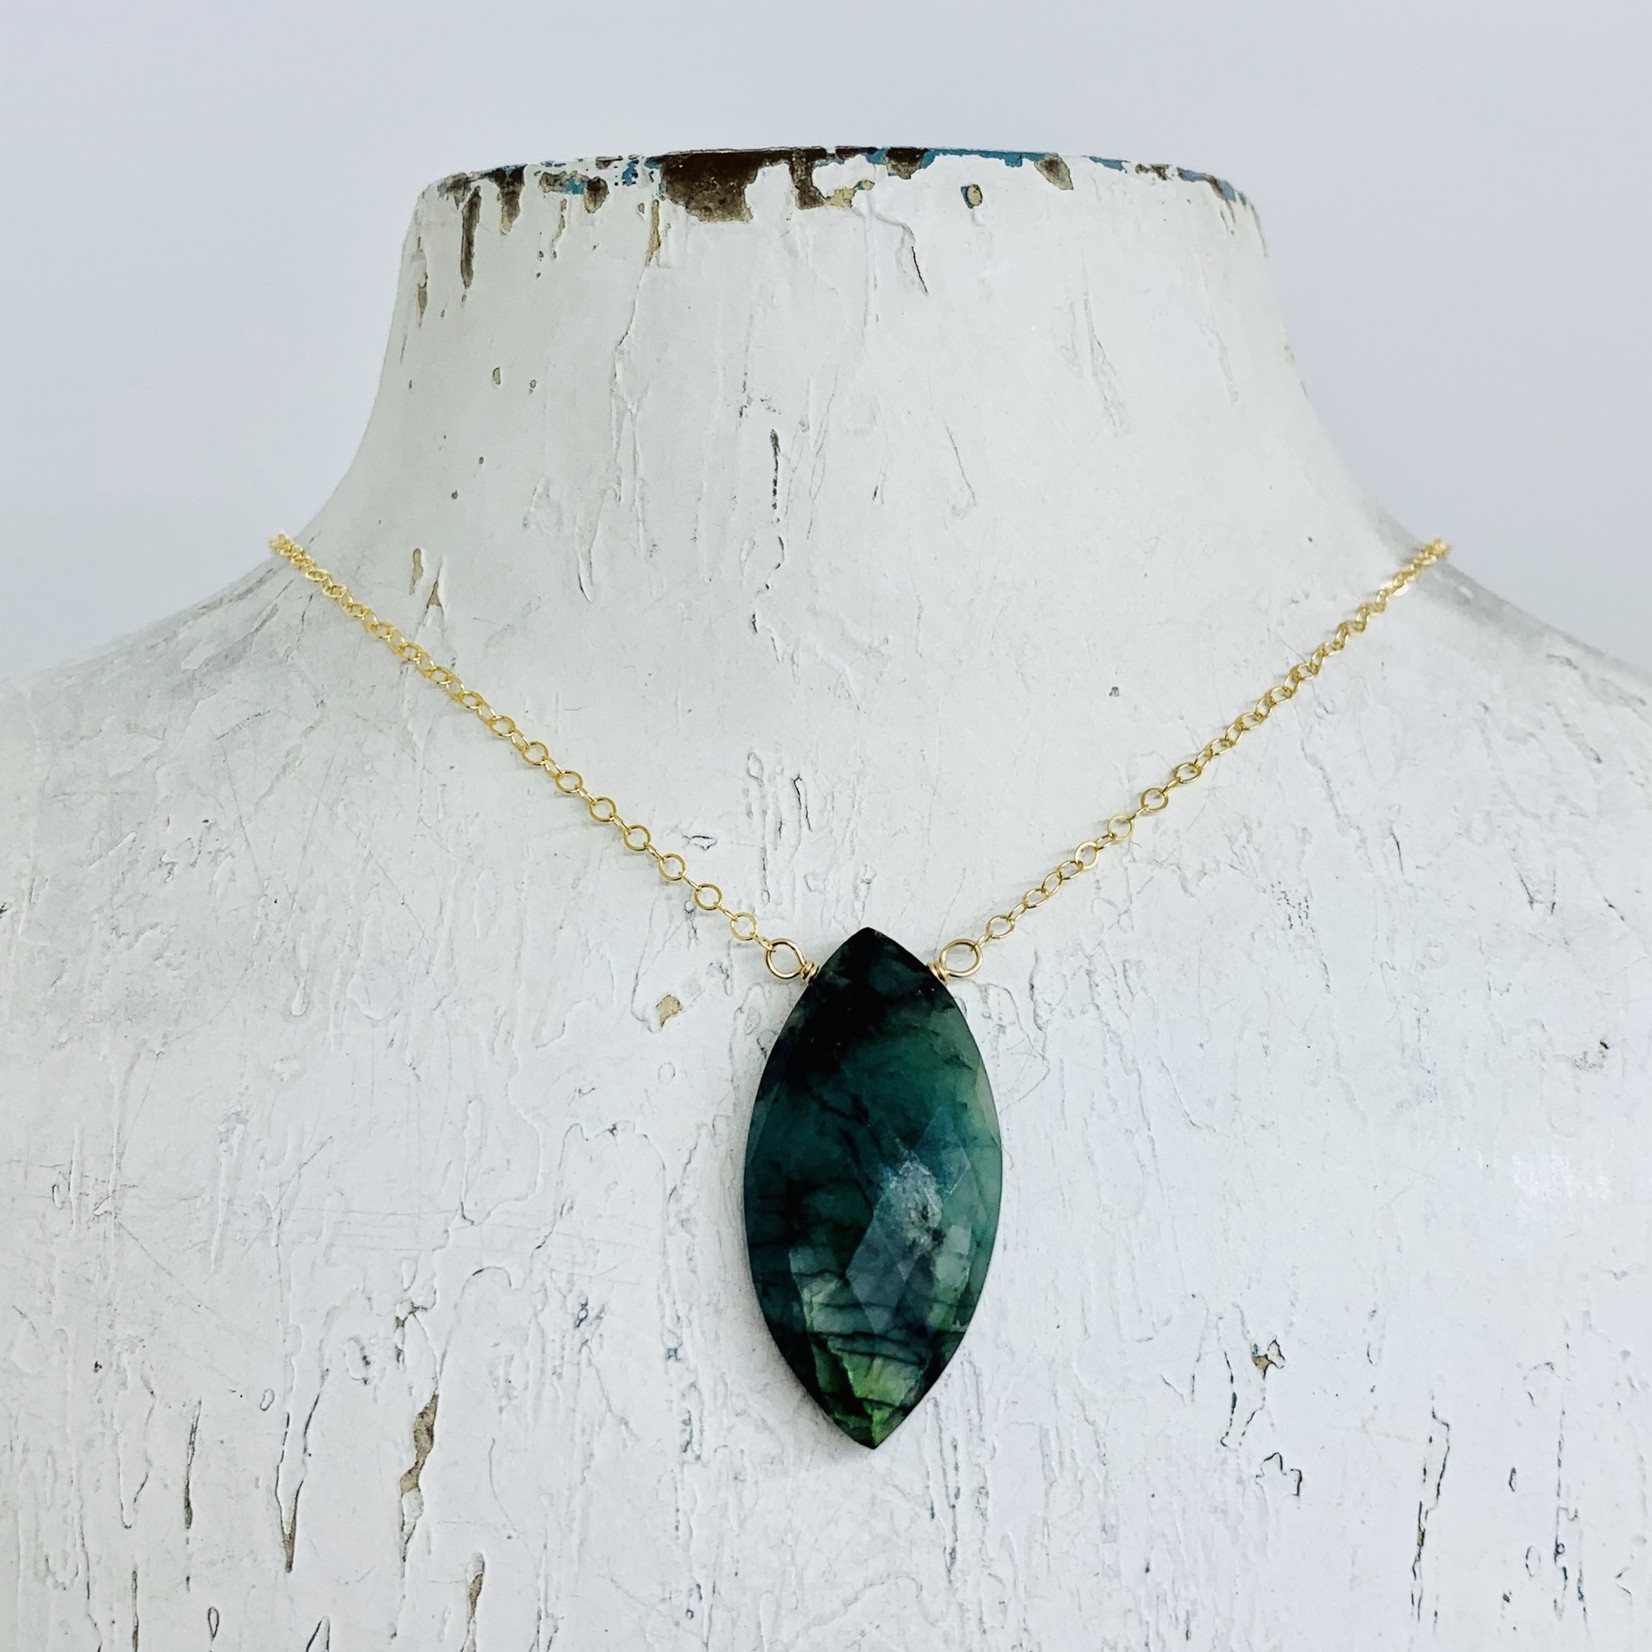 Handmade Large Emerald Marquise and Goldfill Necklace, 18"